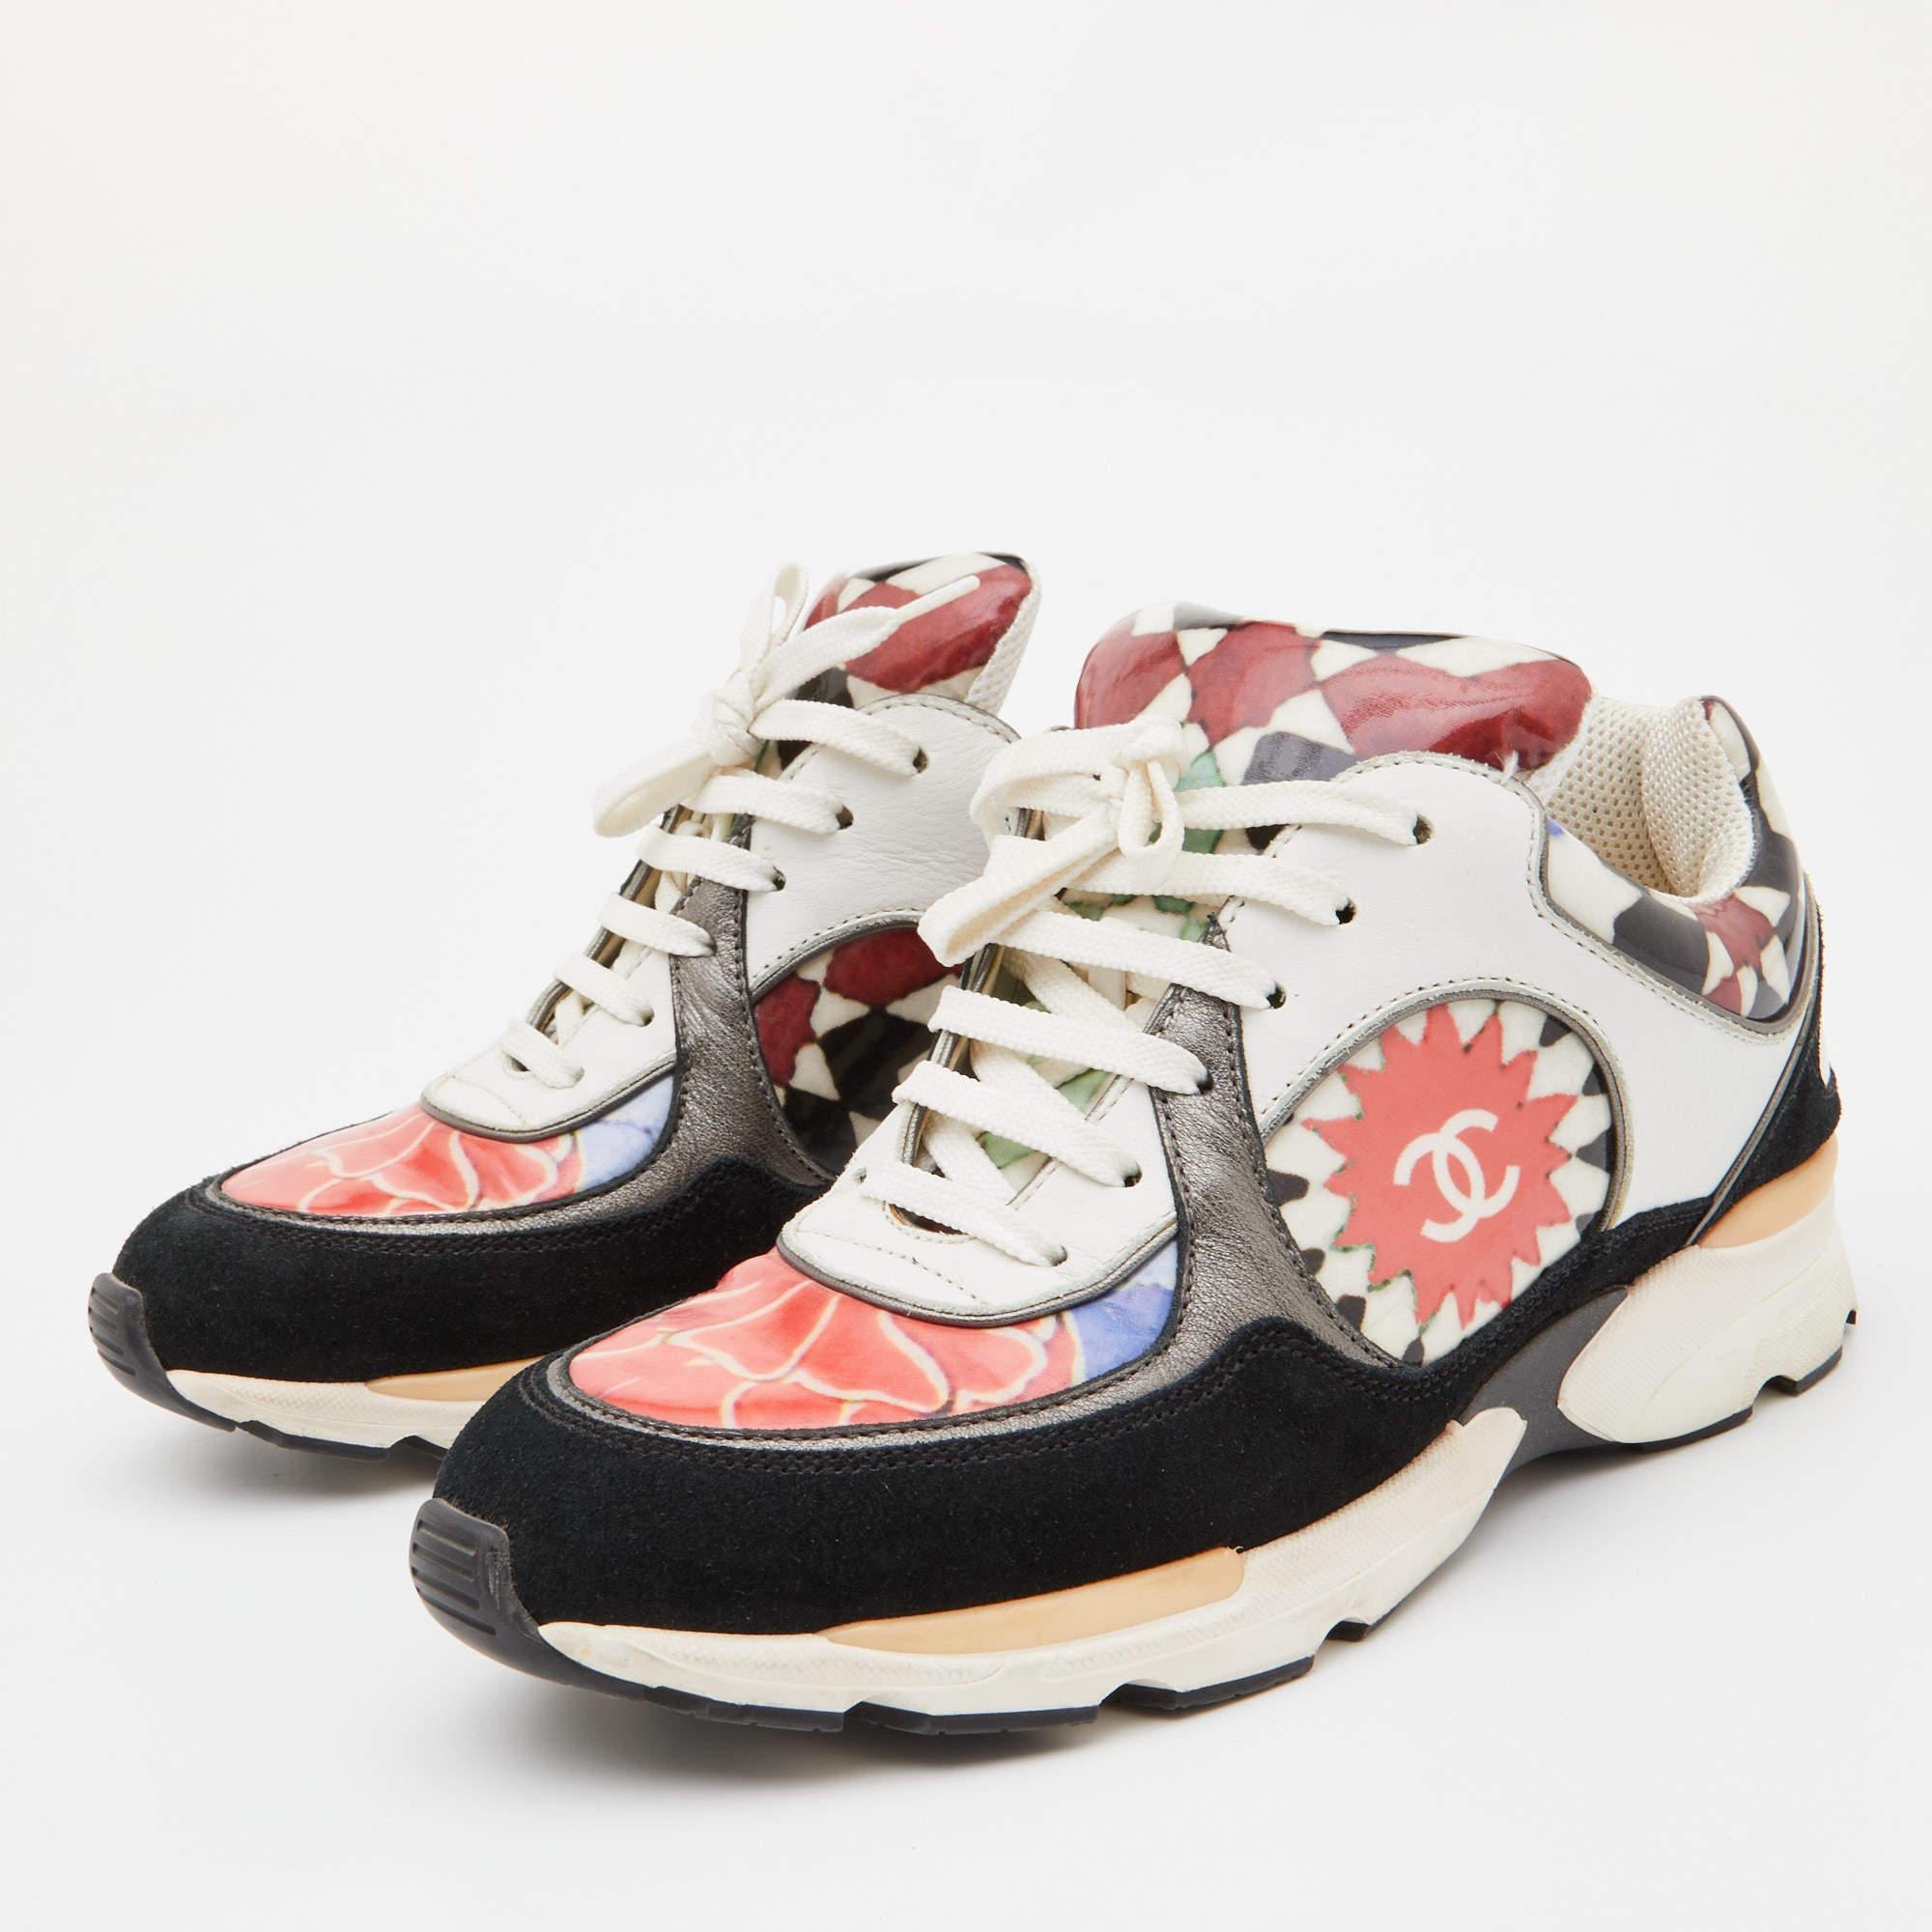 Chanel Multicolor Printed PVC and Leather CC Low Top Sneakers Size 38 2